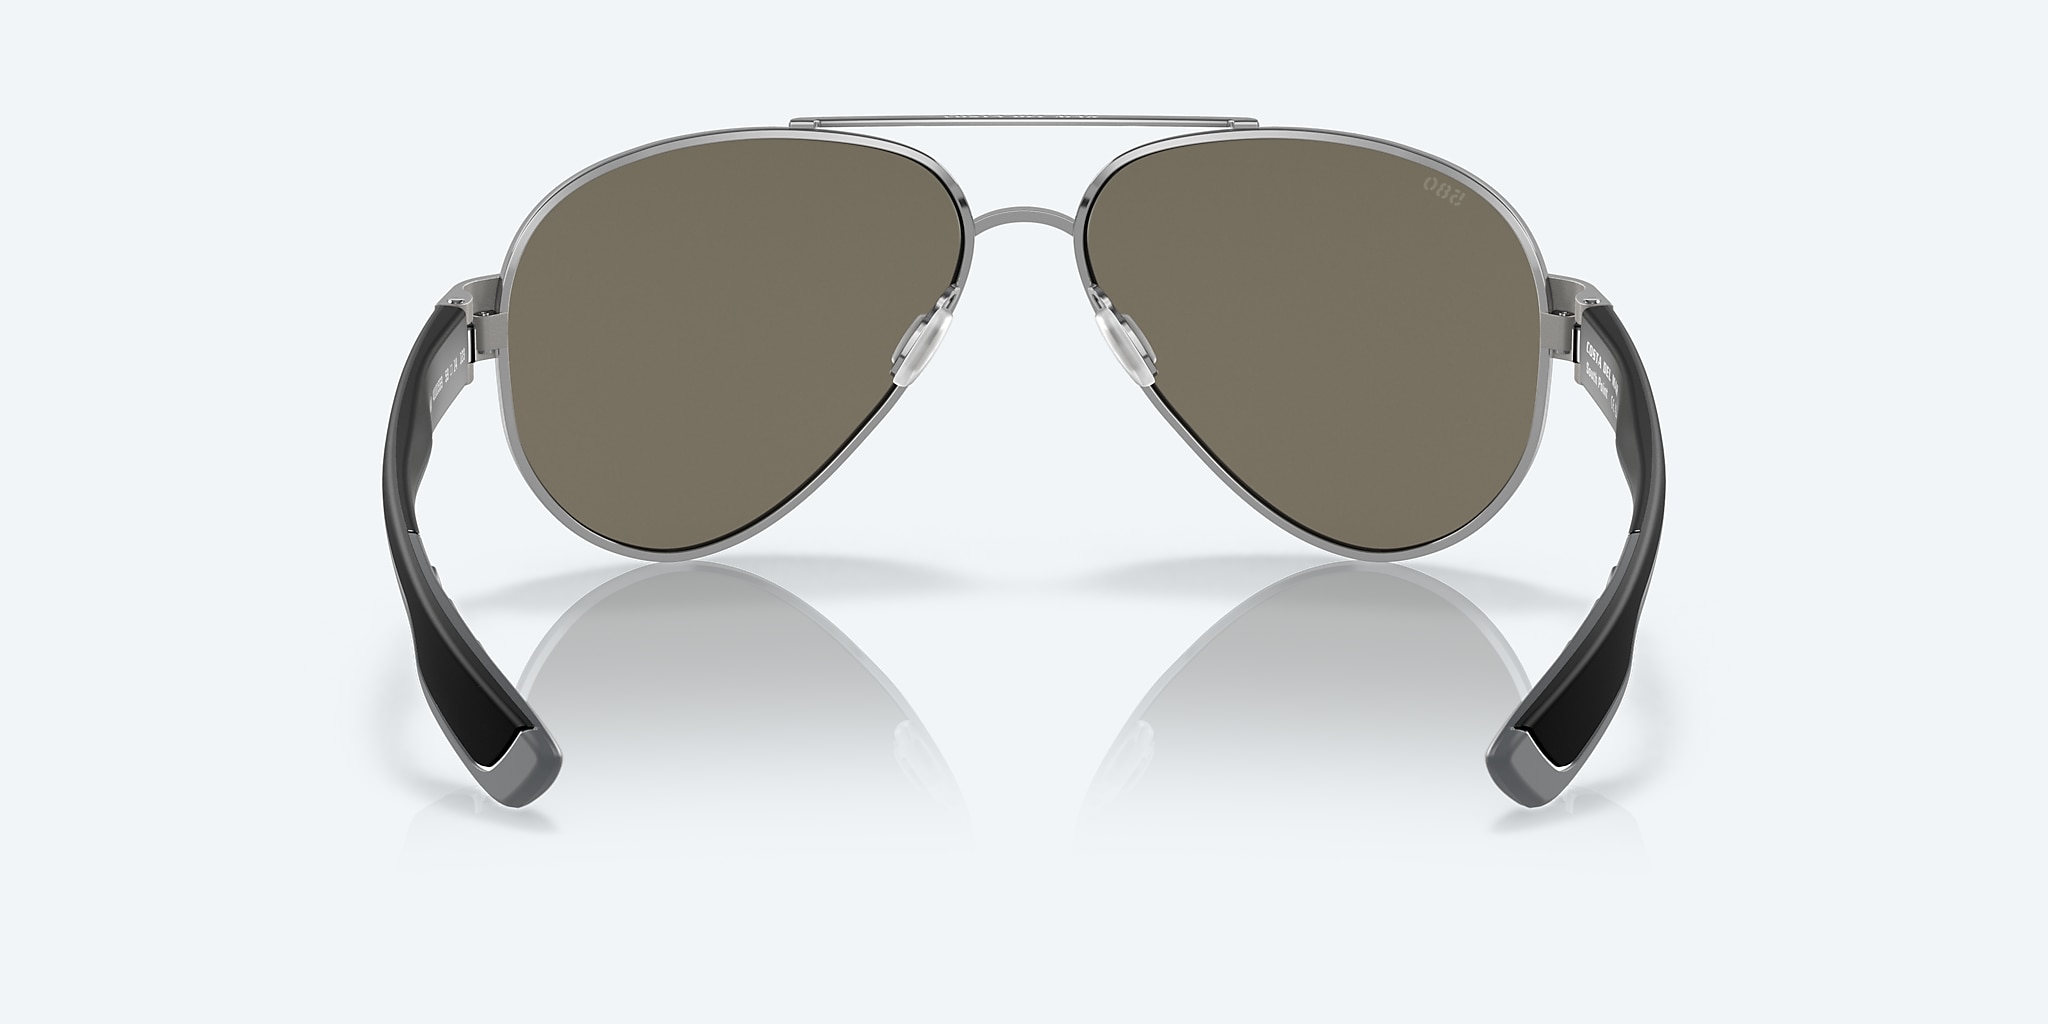 South Point Polarized Sunglasses in Blue Mirror